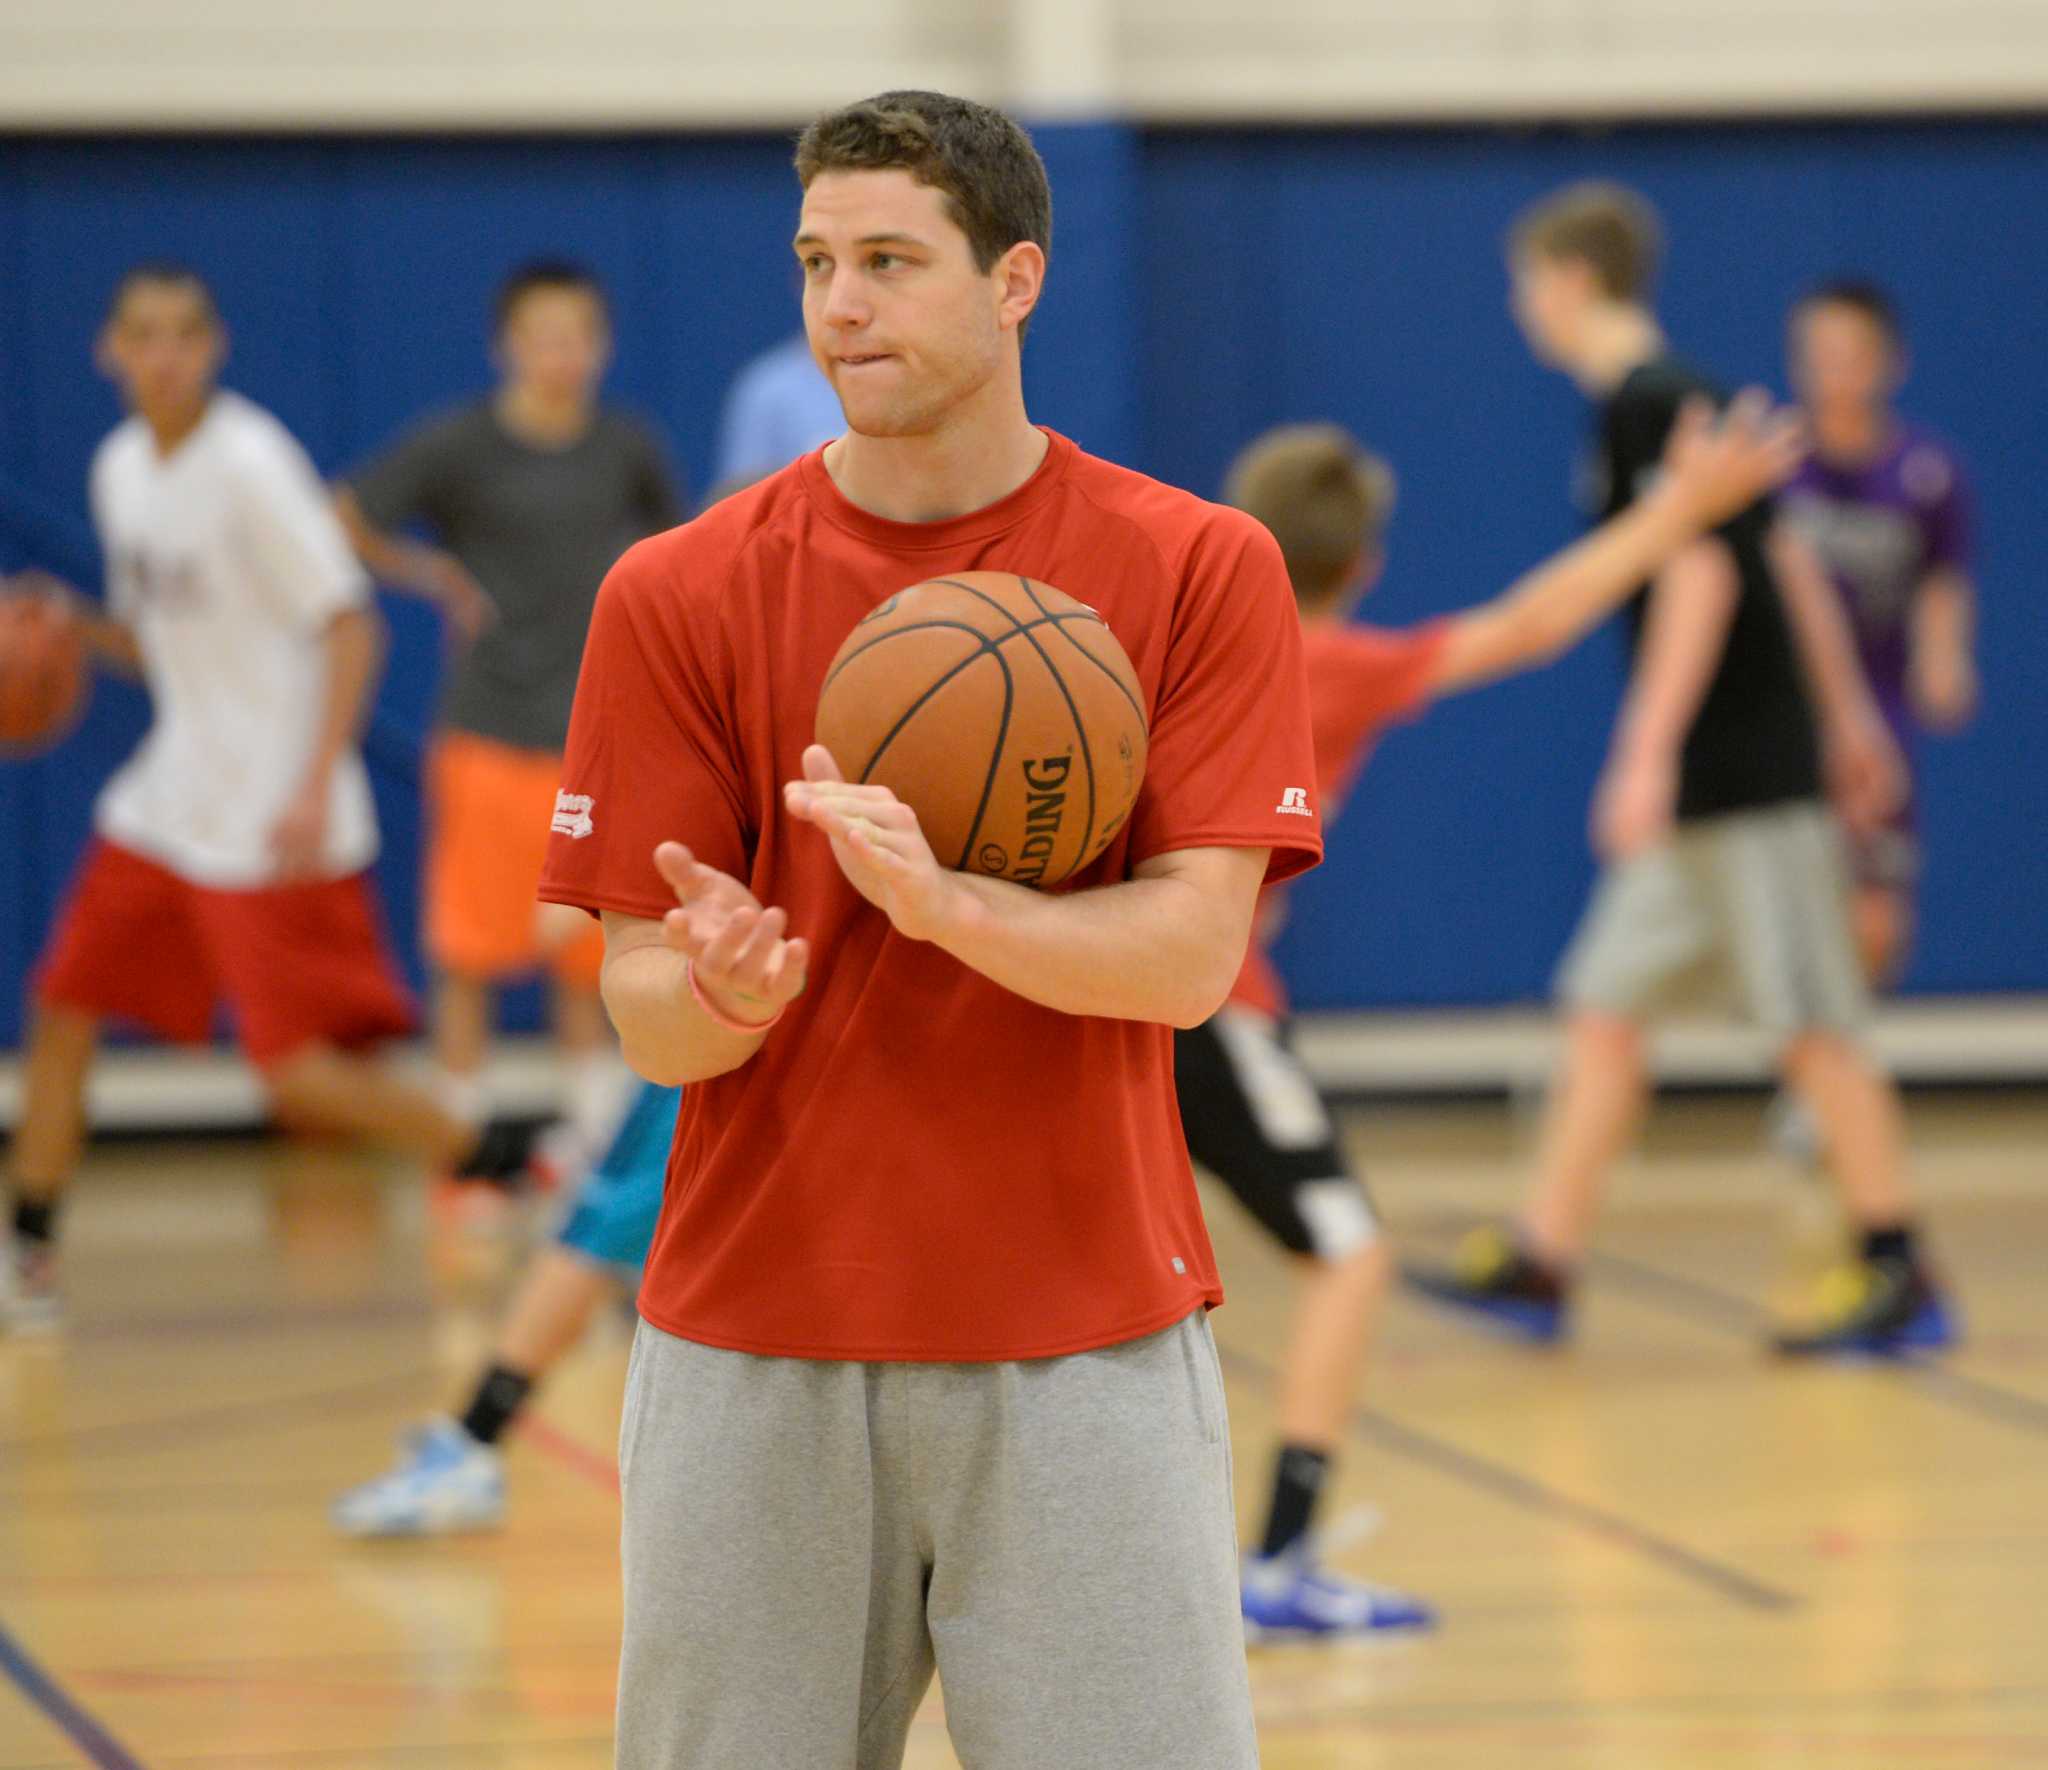 Remember Jimmer Fredette? He's prepping for his biggest shot yet